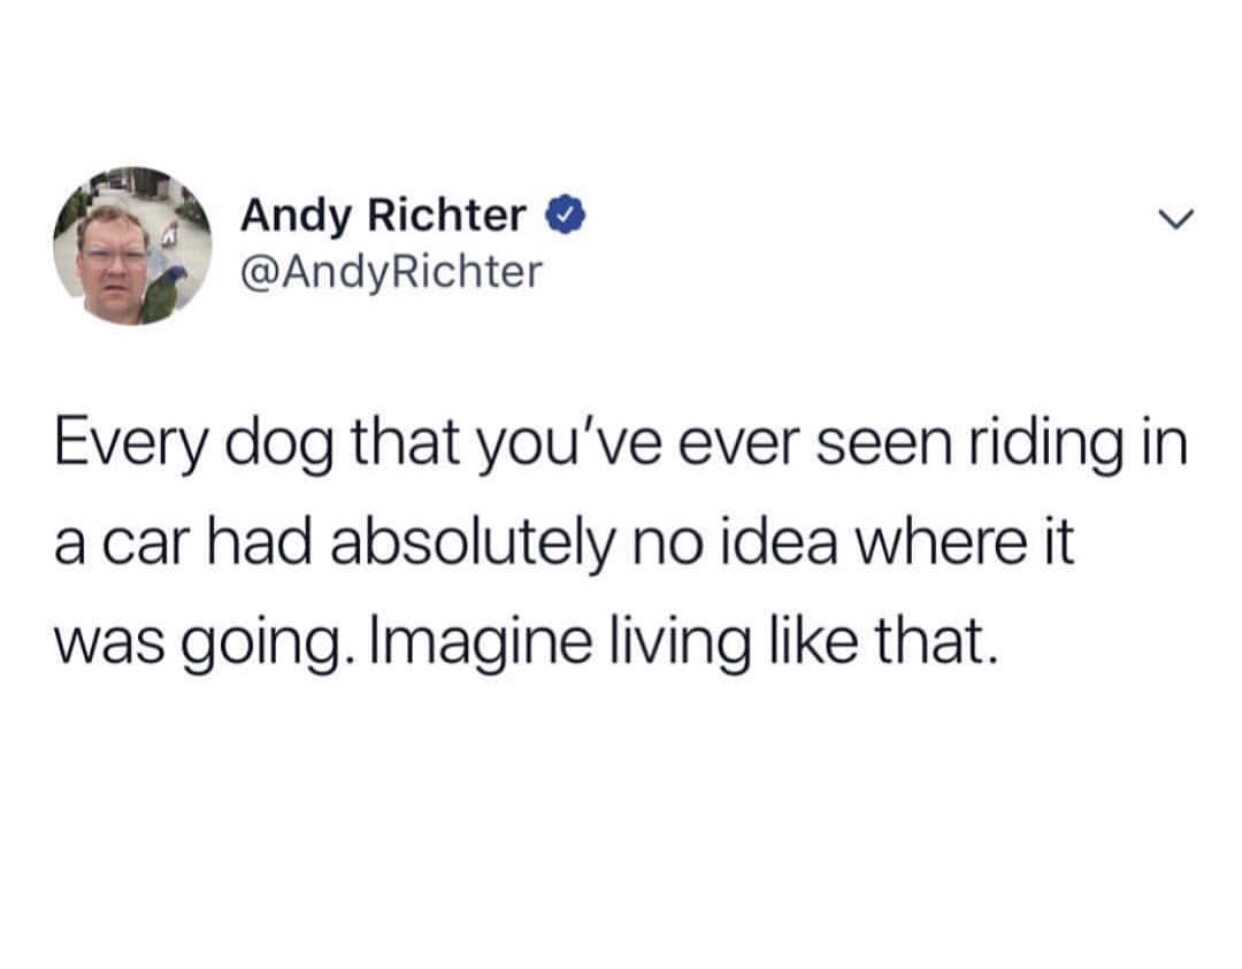 venmo some titty - Andy Richter Richter Every dog that you've ever seen riding in a car had absolutely no idea where it was going. Imagine living that.